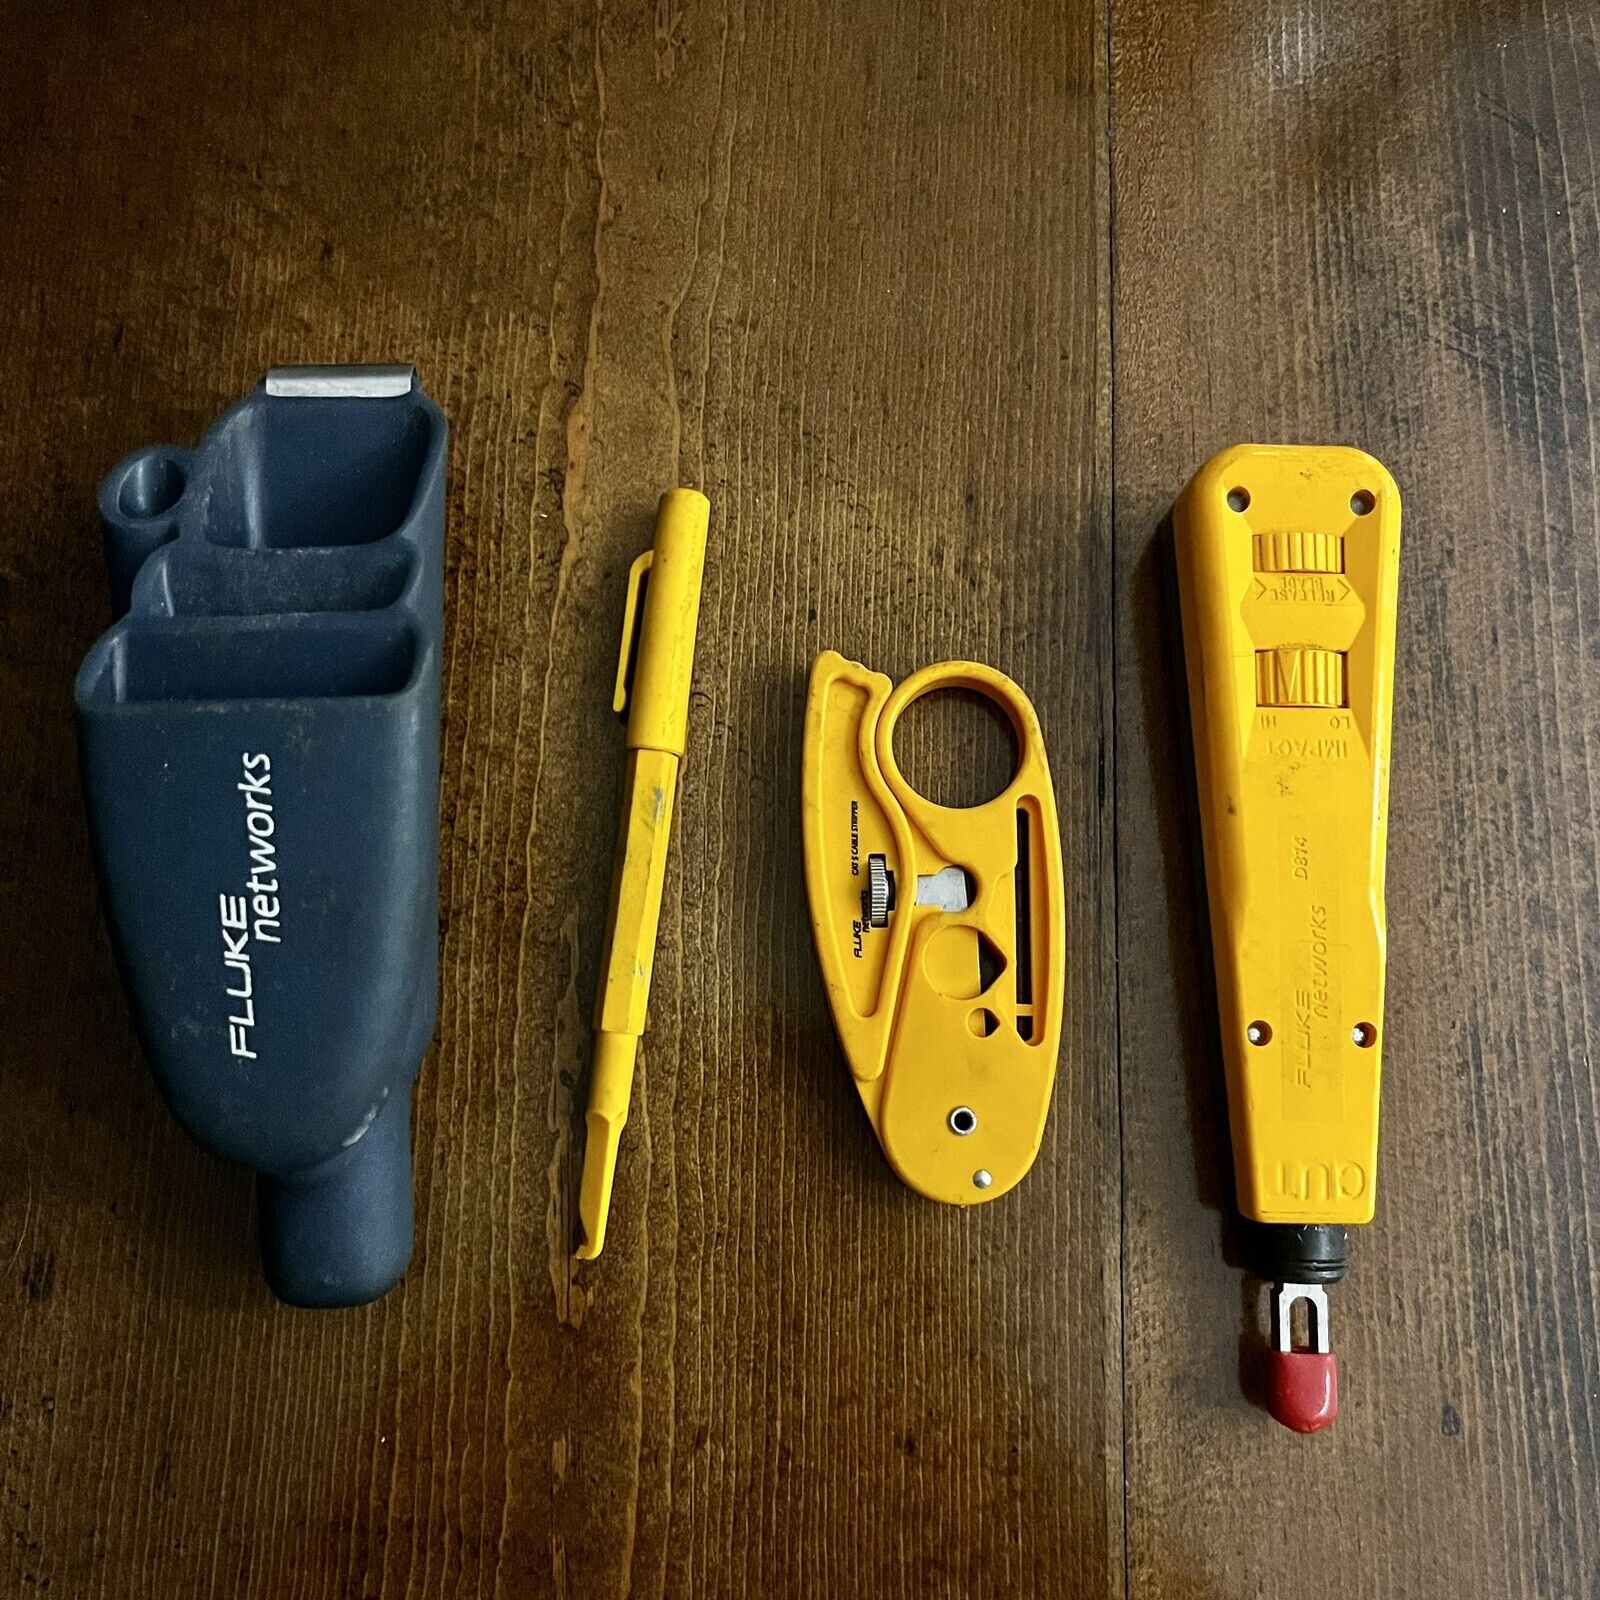 Fluke Networks D814 Impact Punchdown Tool Snips Cutter W/ Carry Pouch